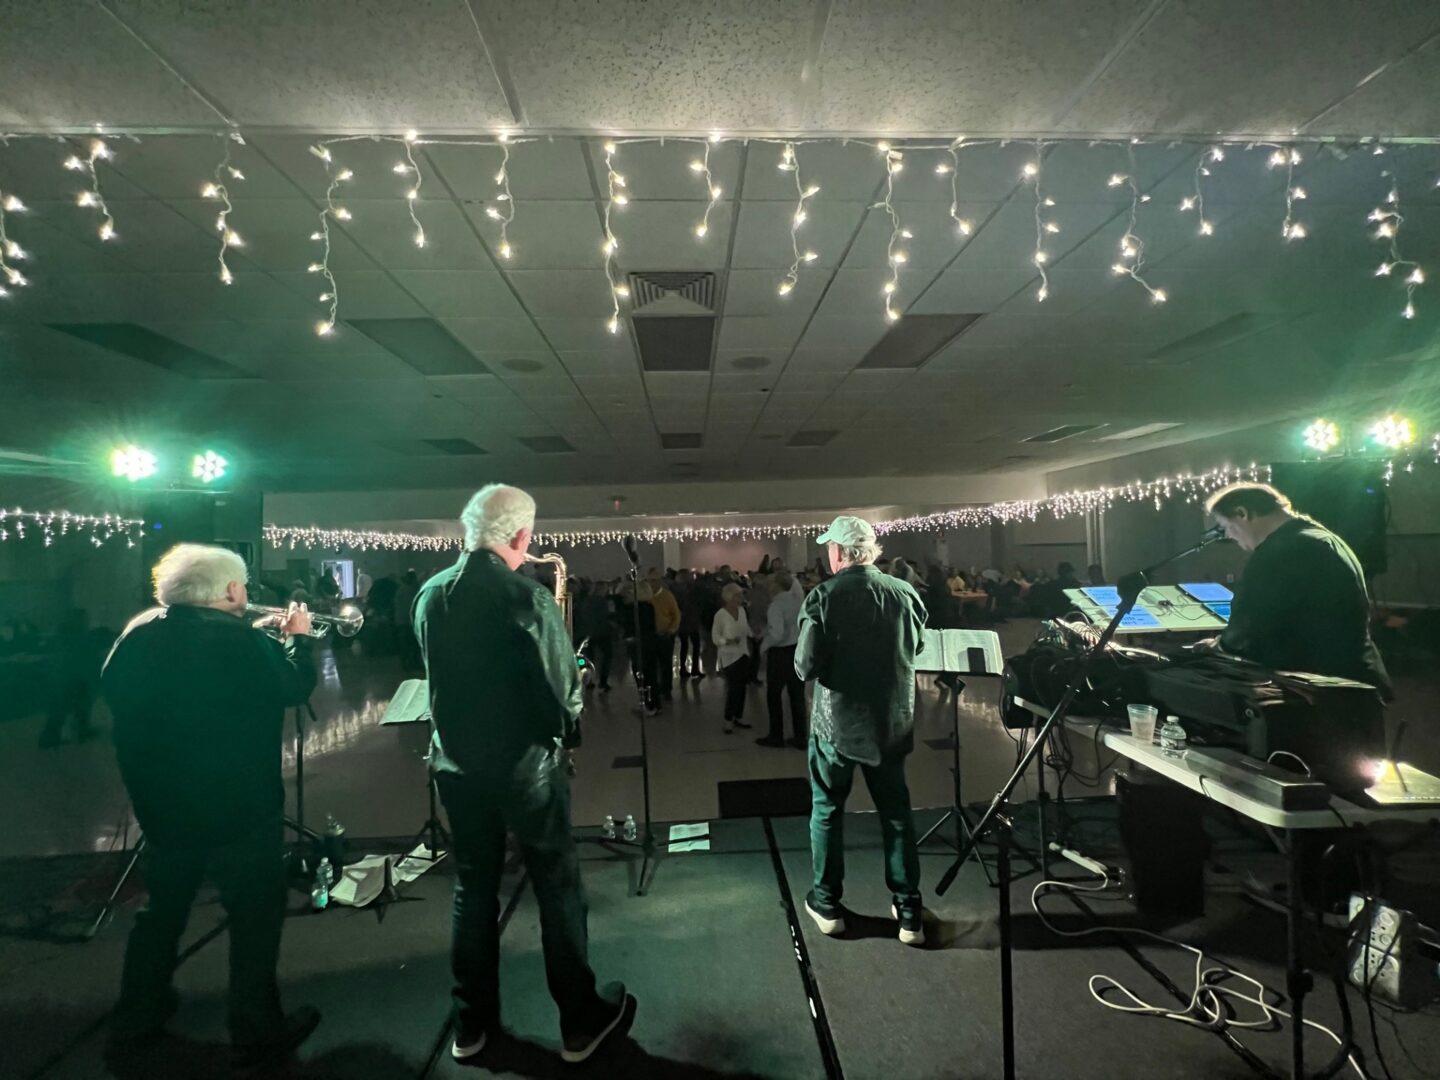 A group of people playing music in a room with lights.